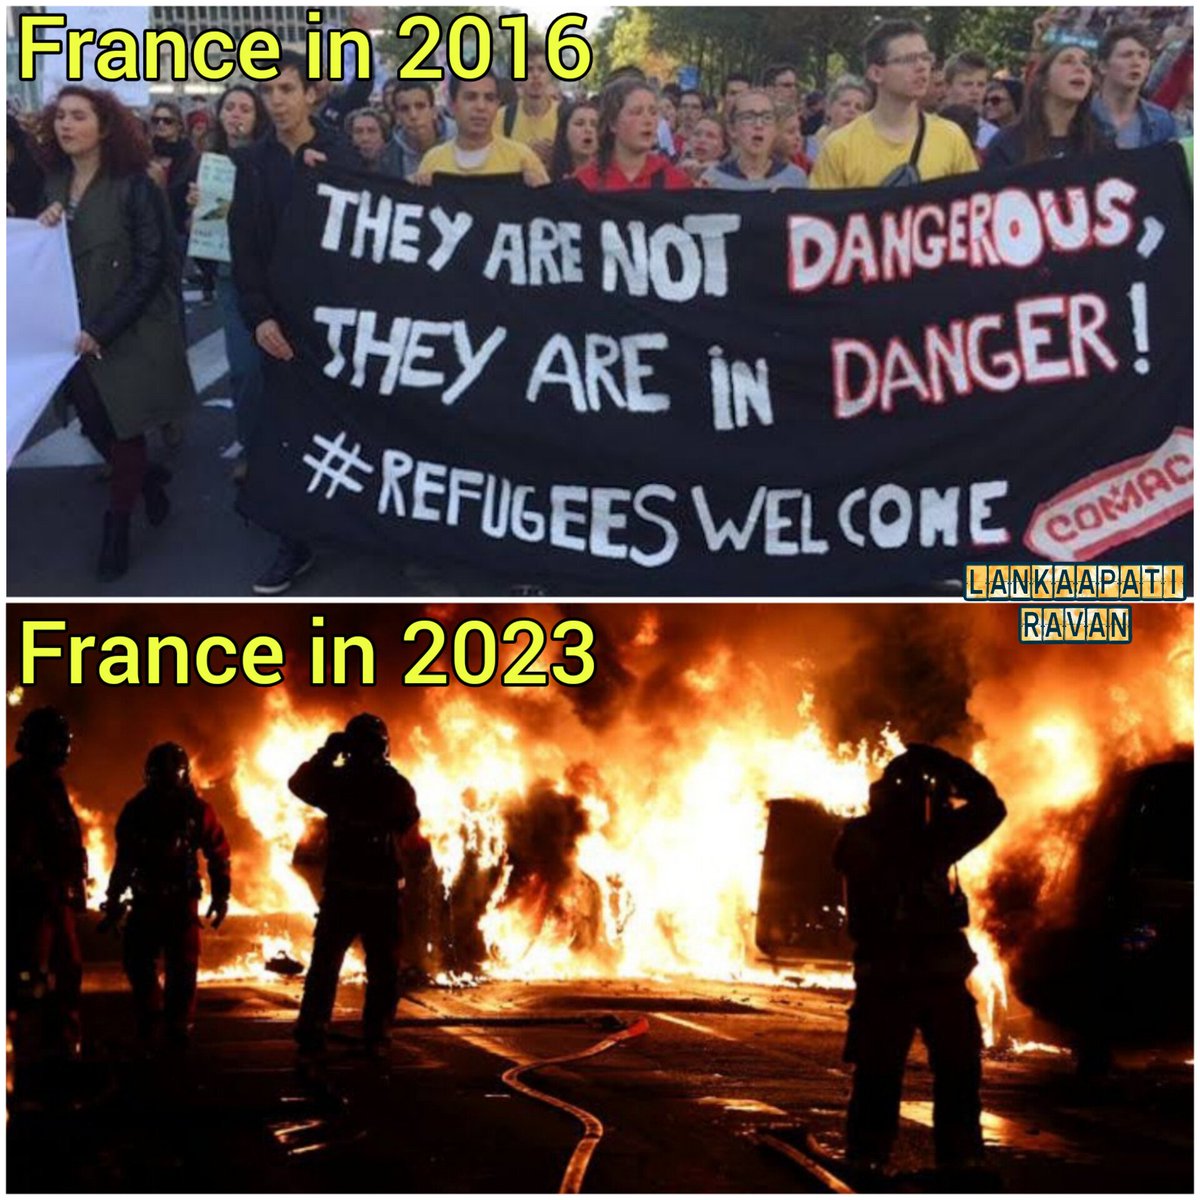 BJP or RSS is the main cause of riots in france . france will have to ban BJP and RSS as soon as possible only then peace will come in the country 😂😂 
#FranceRiots #franceViolence #FranceProtest #Marseille #Immigration #Francia #Francja #FranceHasFallen #Fransa #RiotsFrance